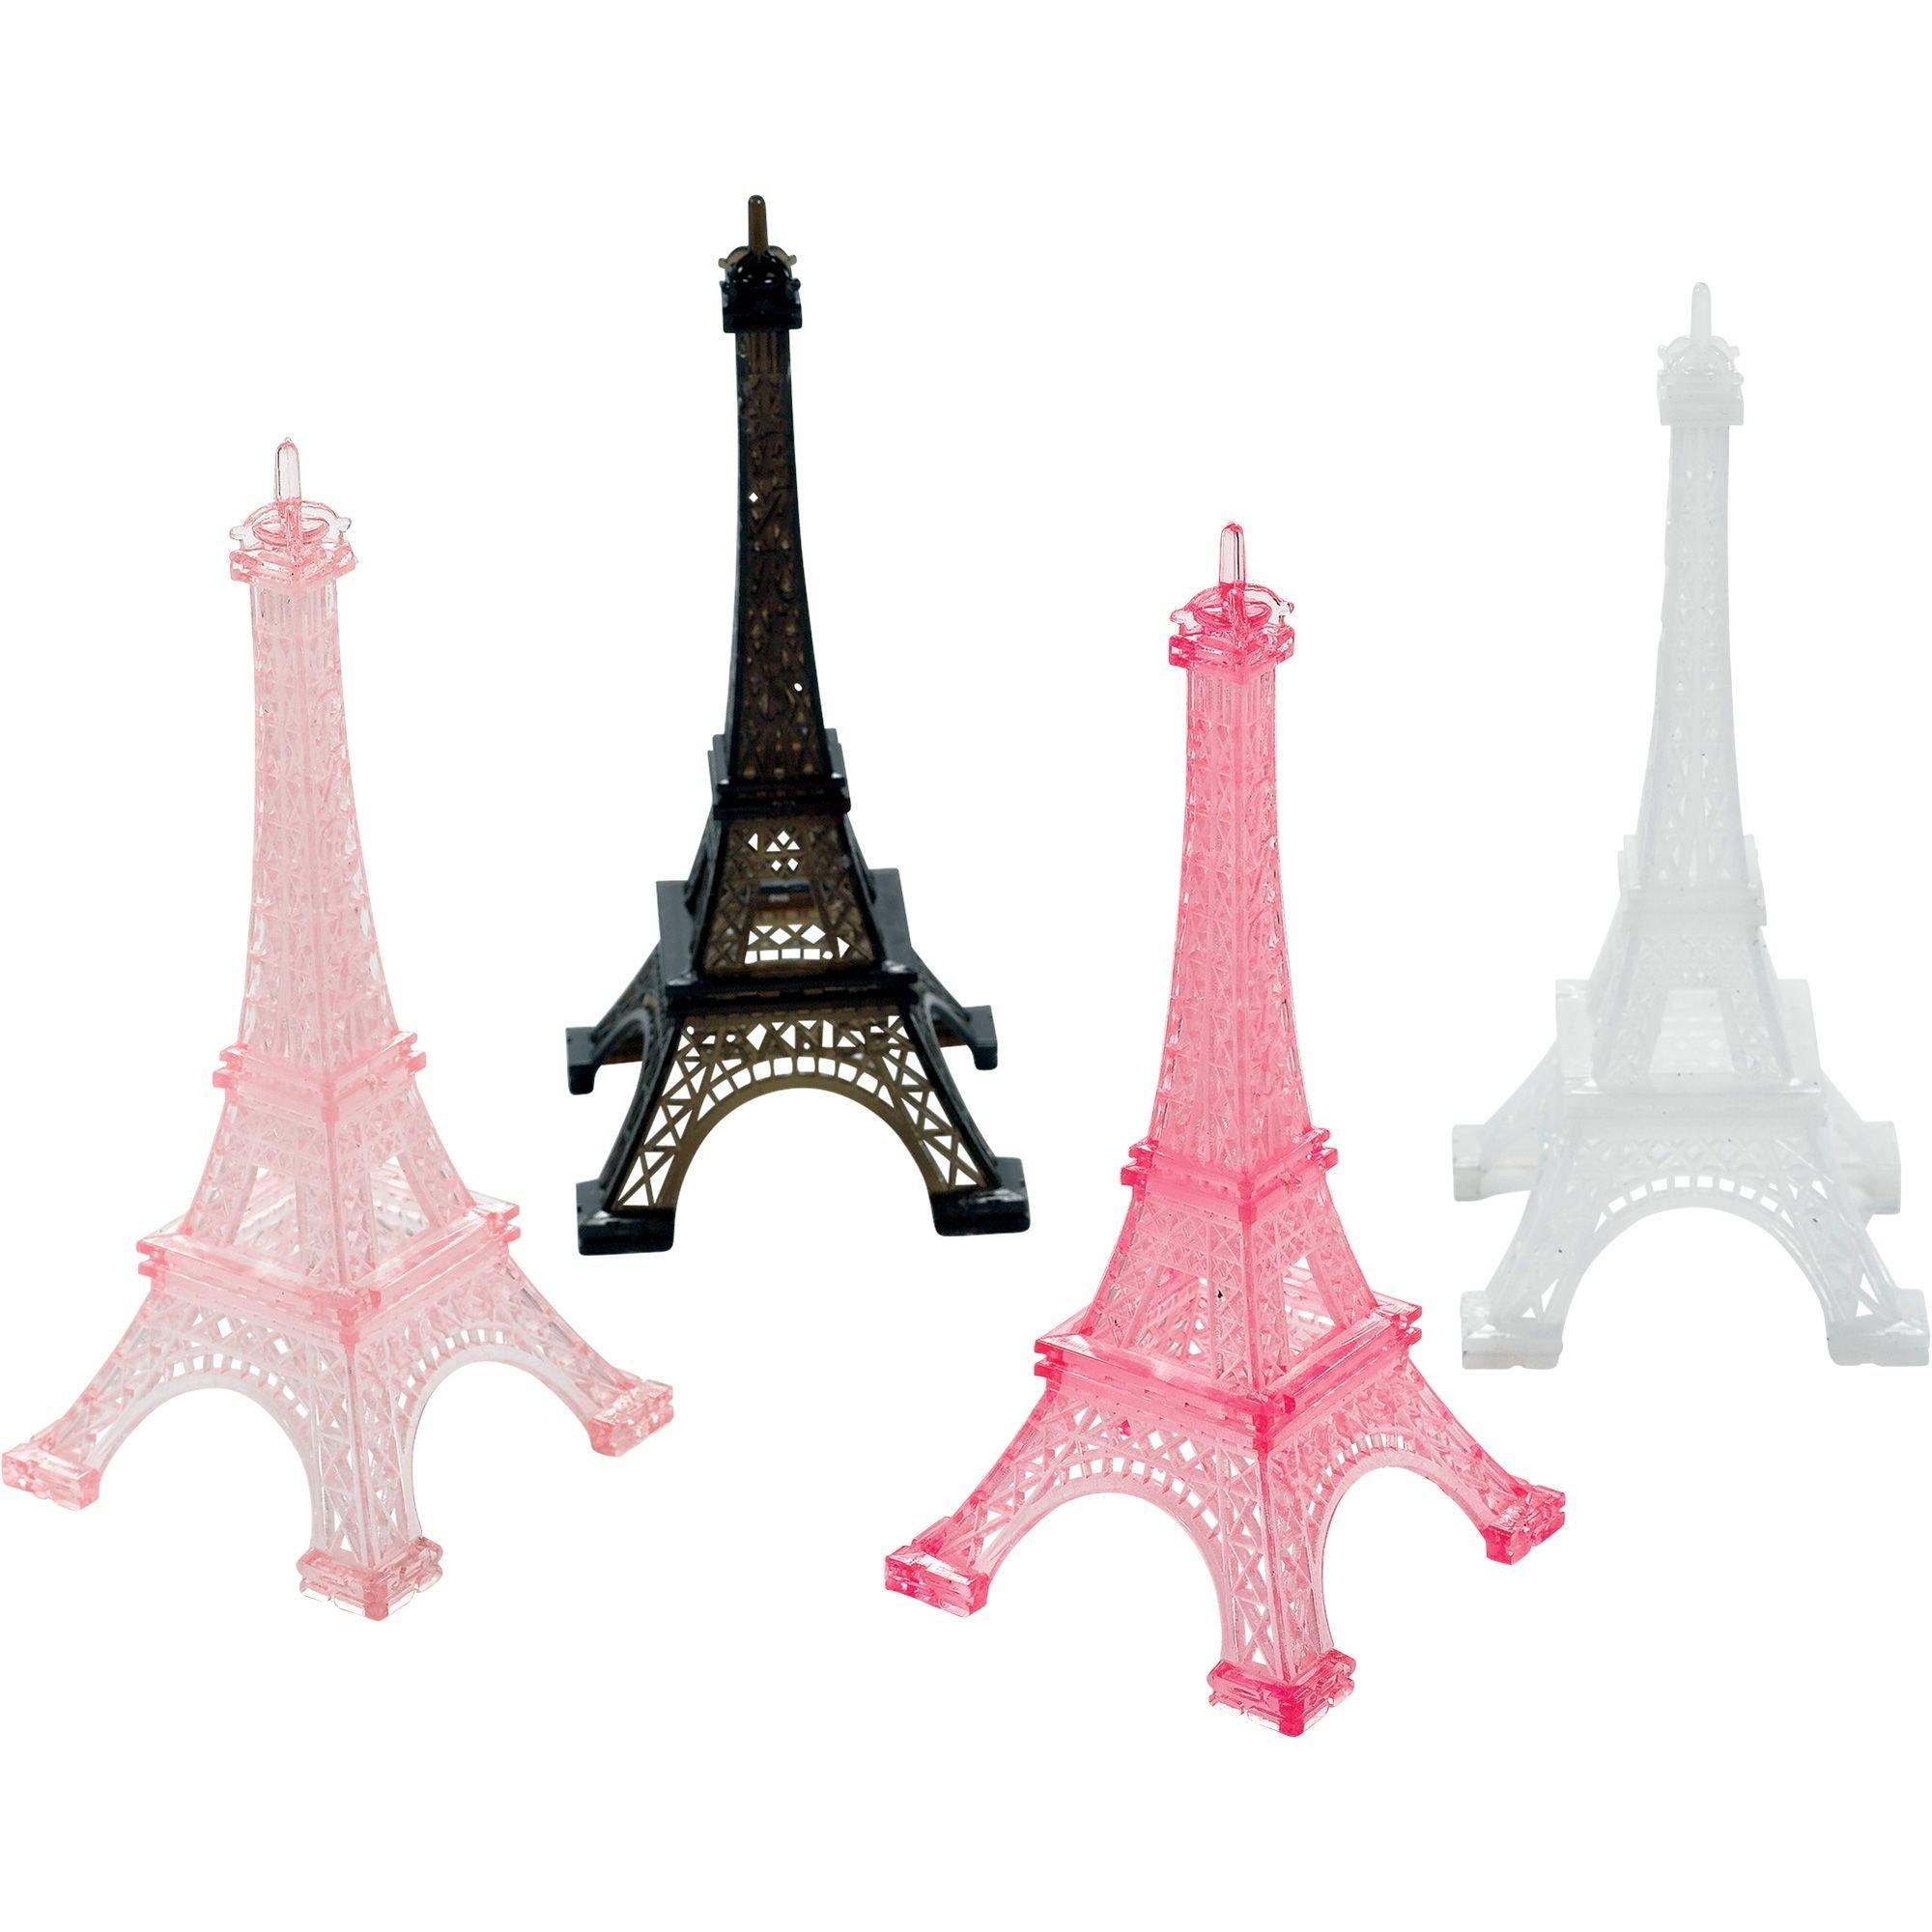 A Day in Paris Eiffel Tower Table Decorations 4ct | Party City